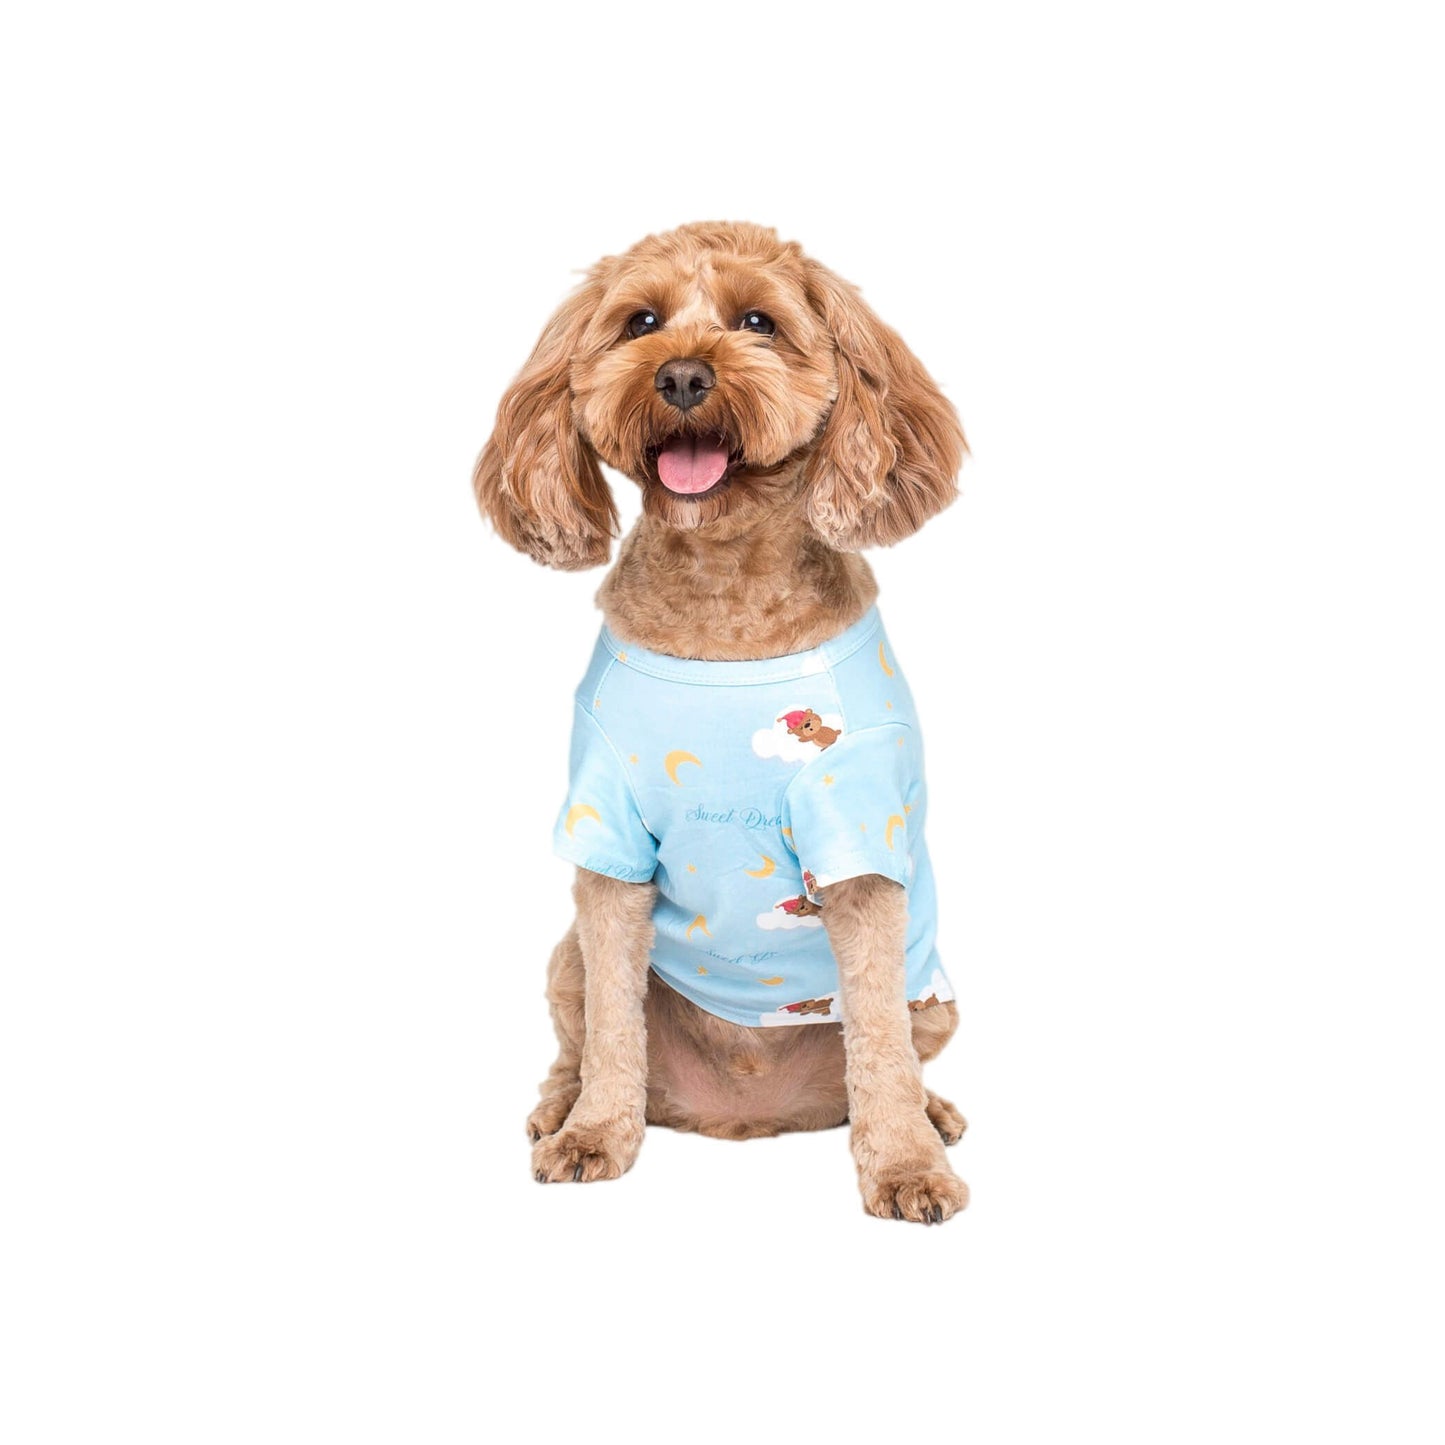 A Cavoodle dog wearing Vibrant Hound Lil dreamer dog pyjamas. The dog pyjamas are blue with teddy bears floating on clouds.